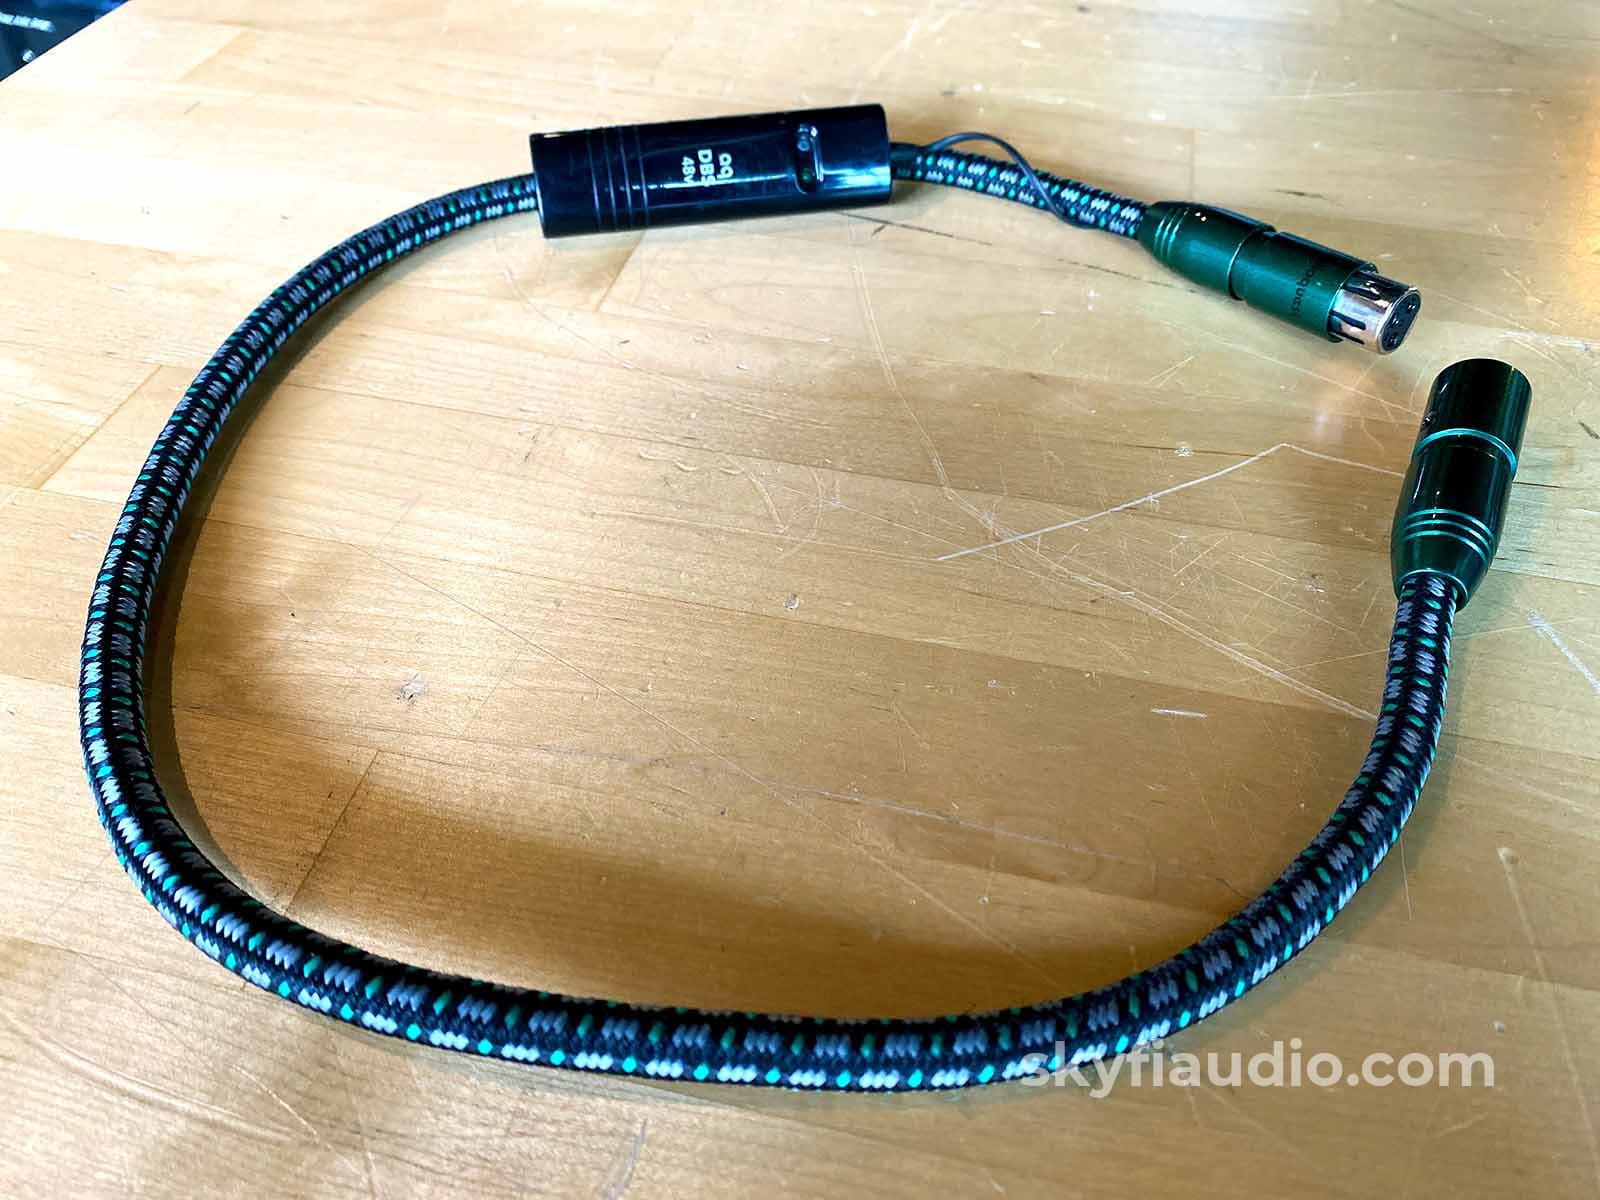 Audioquest Columbia Xlr Interconnect (Single) W/ Dbs For Center Channel - 0.75M Cables